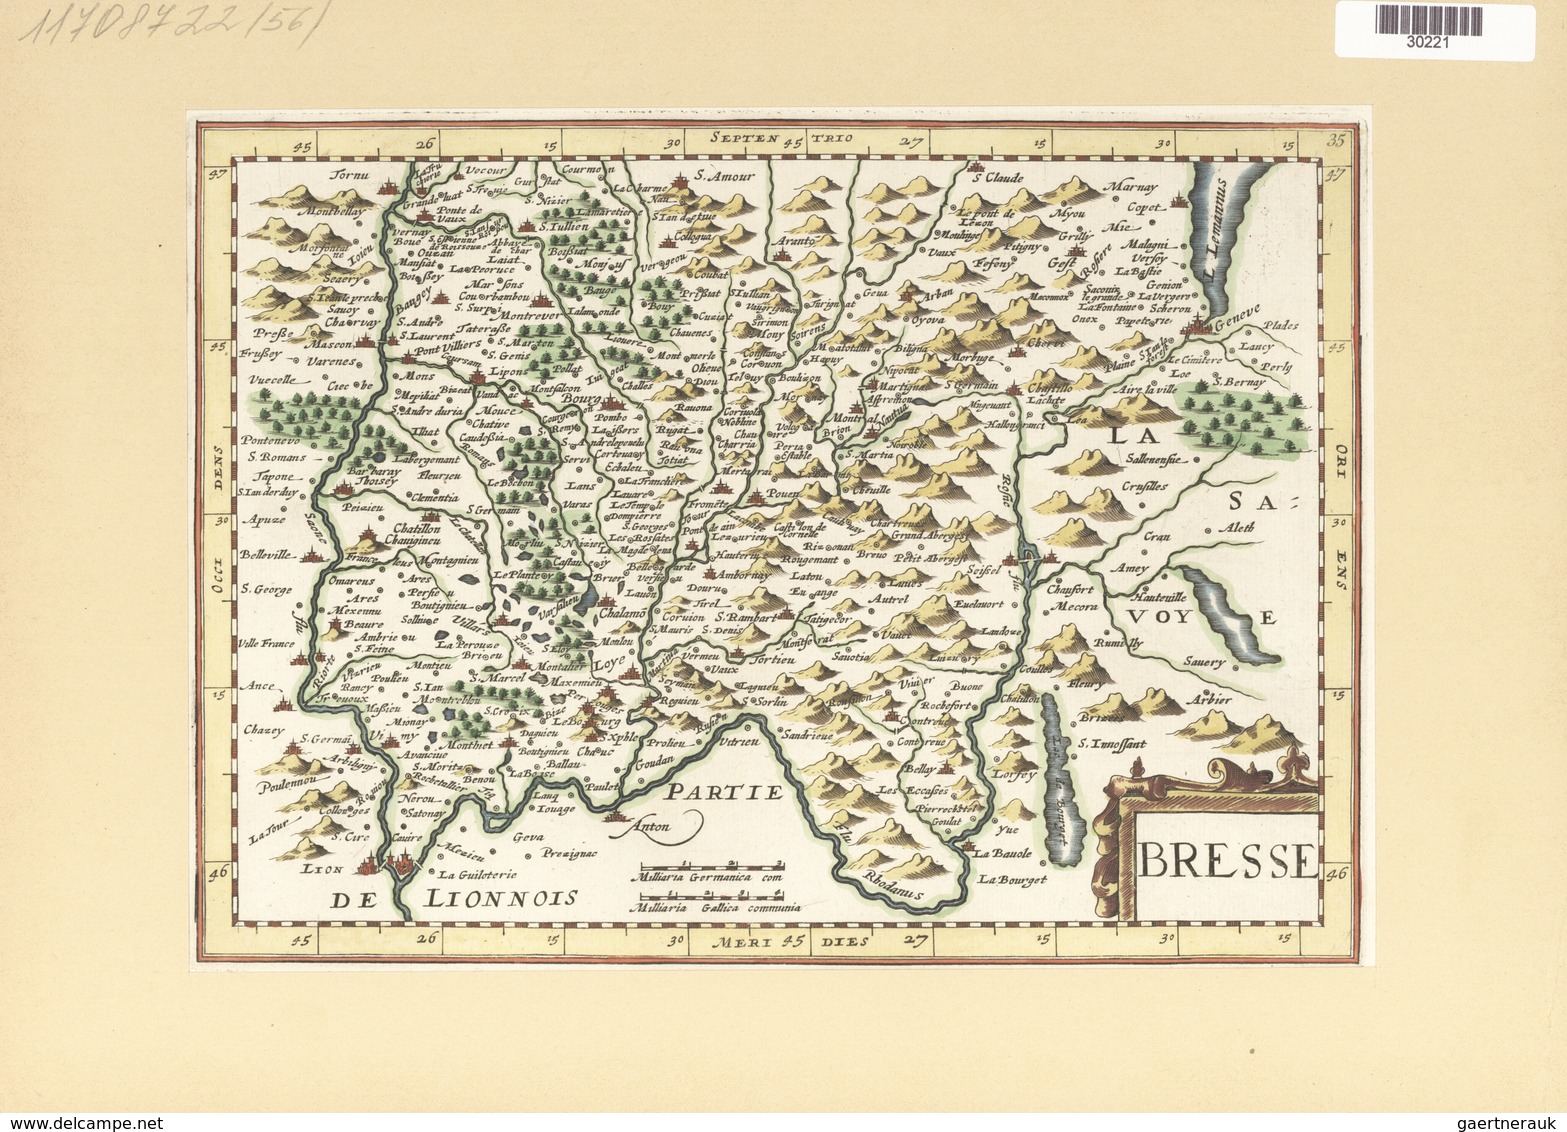 Landkarten Und Stiche: 1734. Bresse. Map Of The Bresse, Burgundy Region Of France, Published In The - Geography